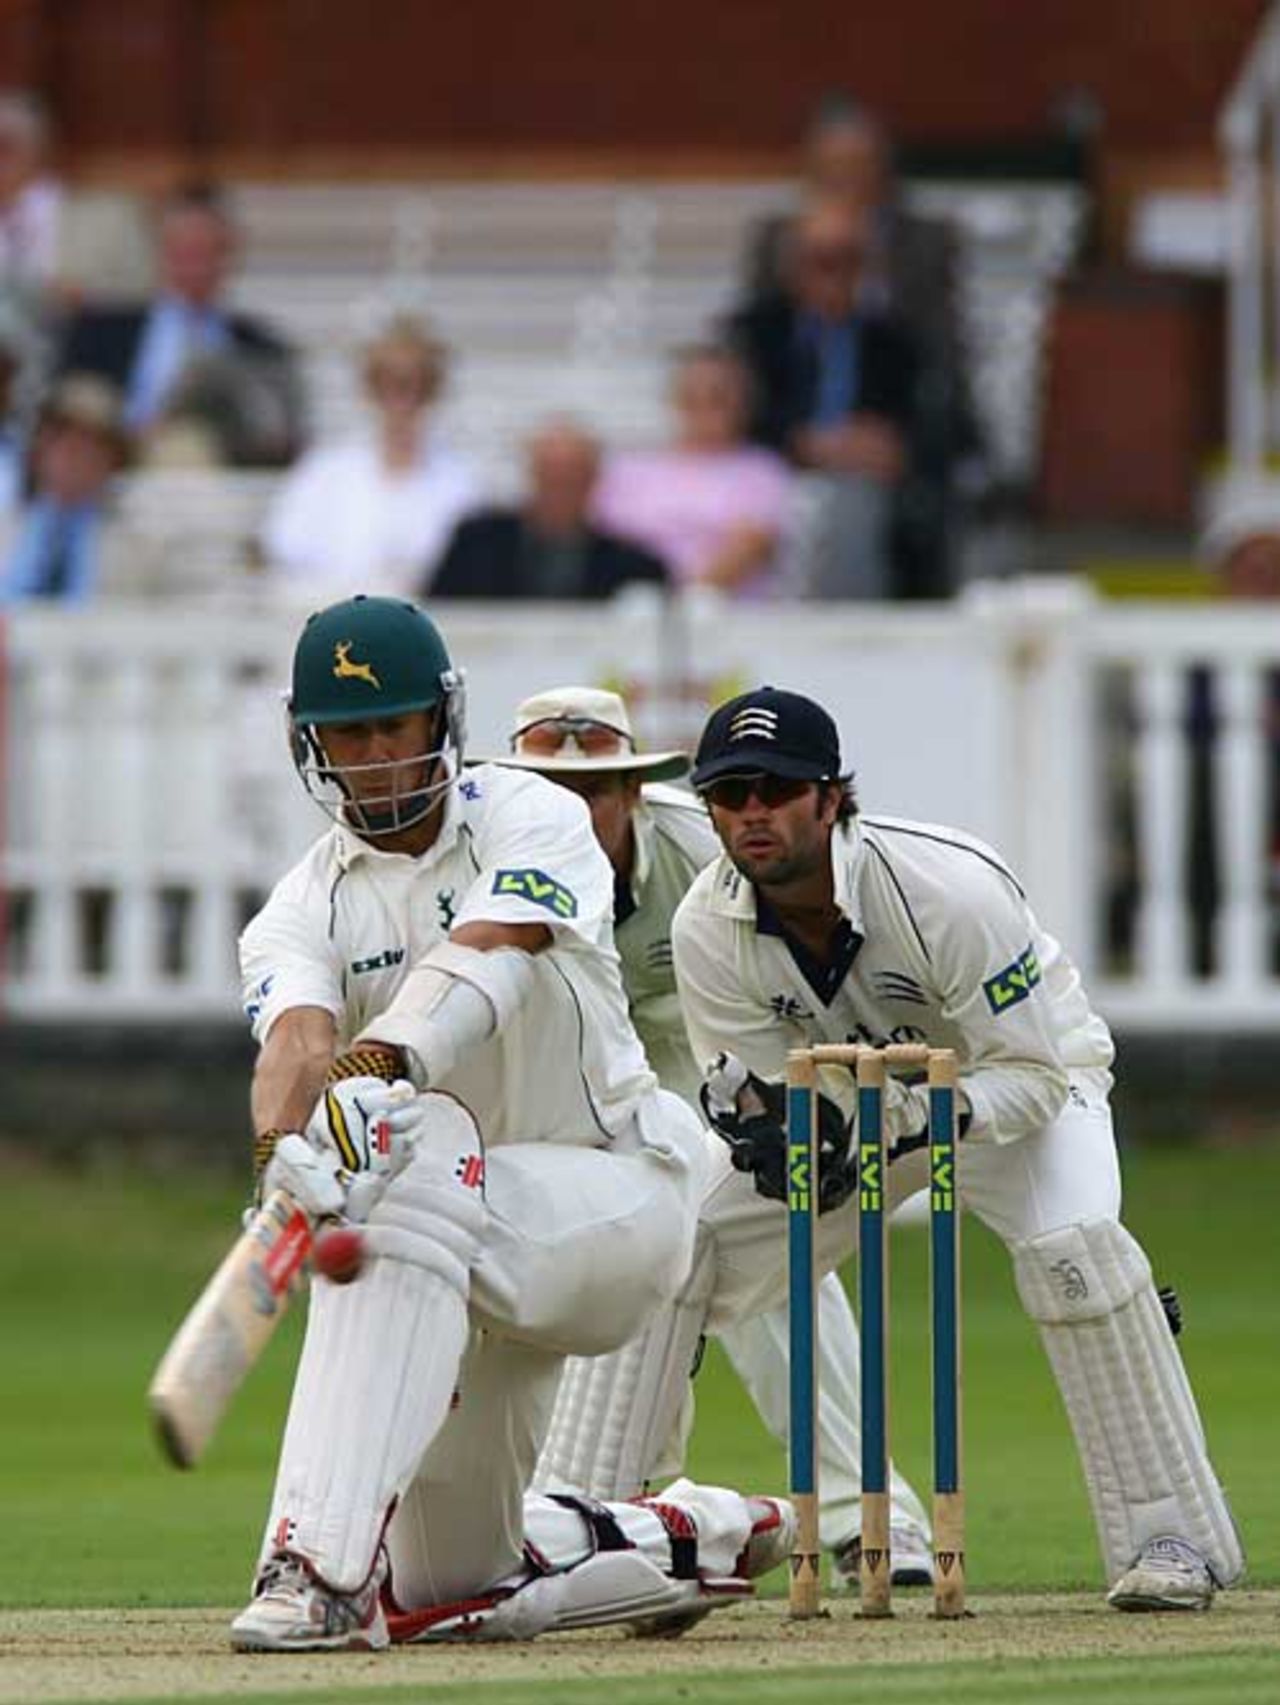 Mark Wagh sweeps as Nottinghamshire make a solid start at Lord's, Middlesex v Nottinghamshire, County Championship, Lord's, August 29, 2007